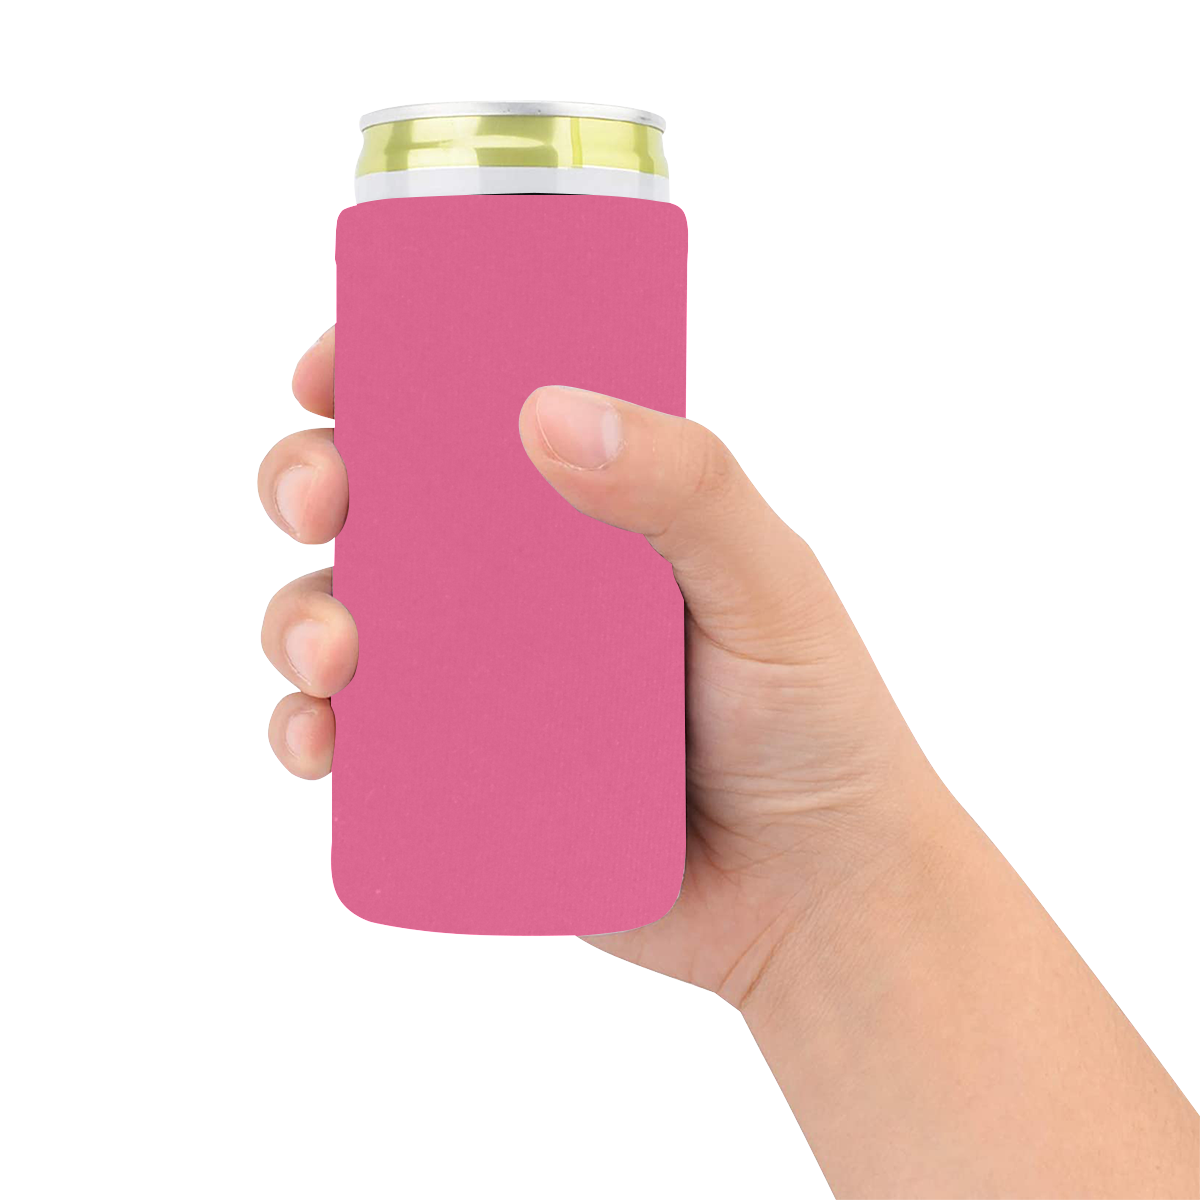 color French pink Neoprene Can Cooler 5" x 2.3" dia.